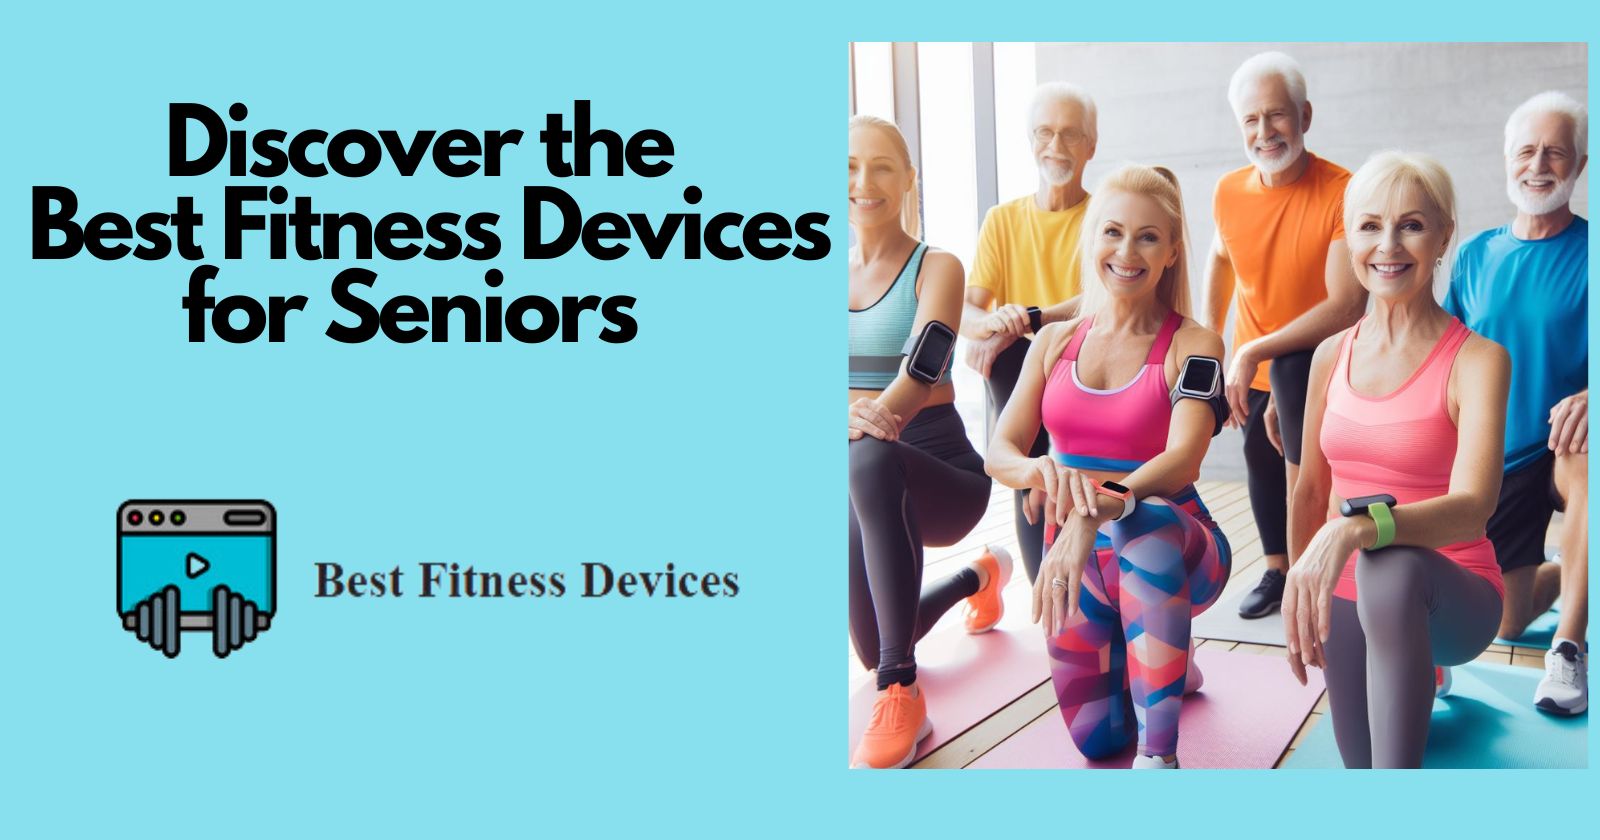 Fitness Devices for Seniors